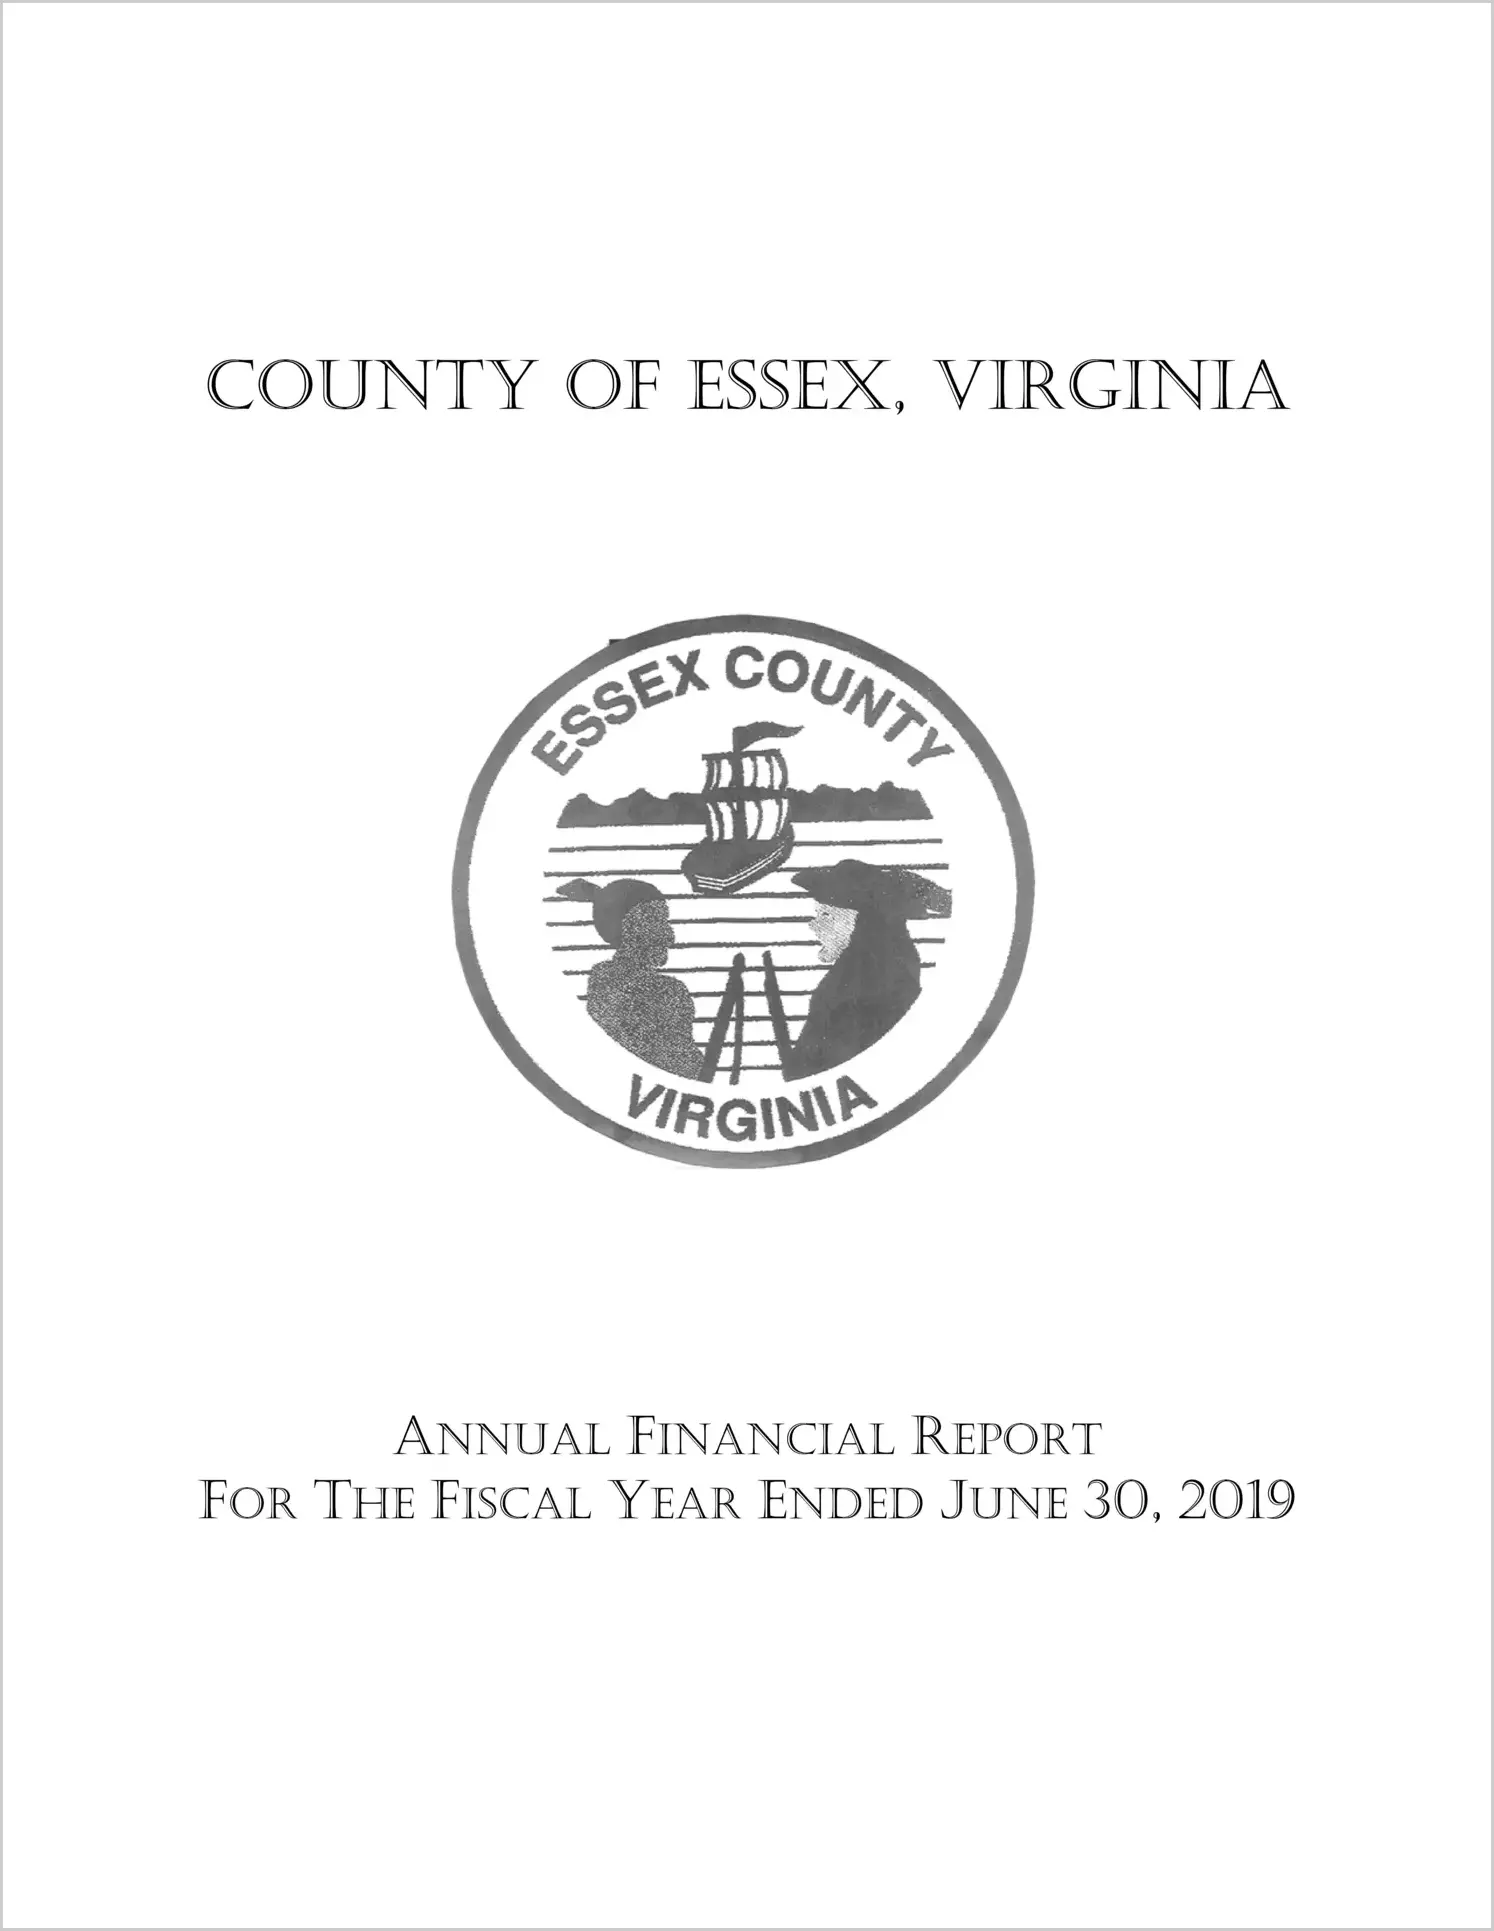 2019 Annual Financial Report for County of Essex